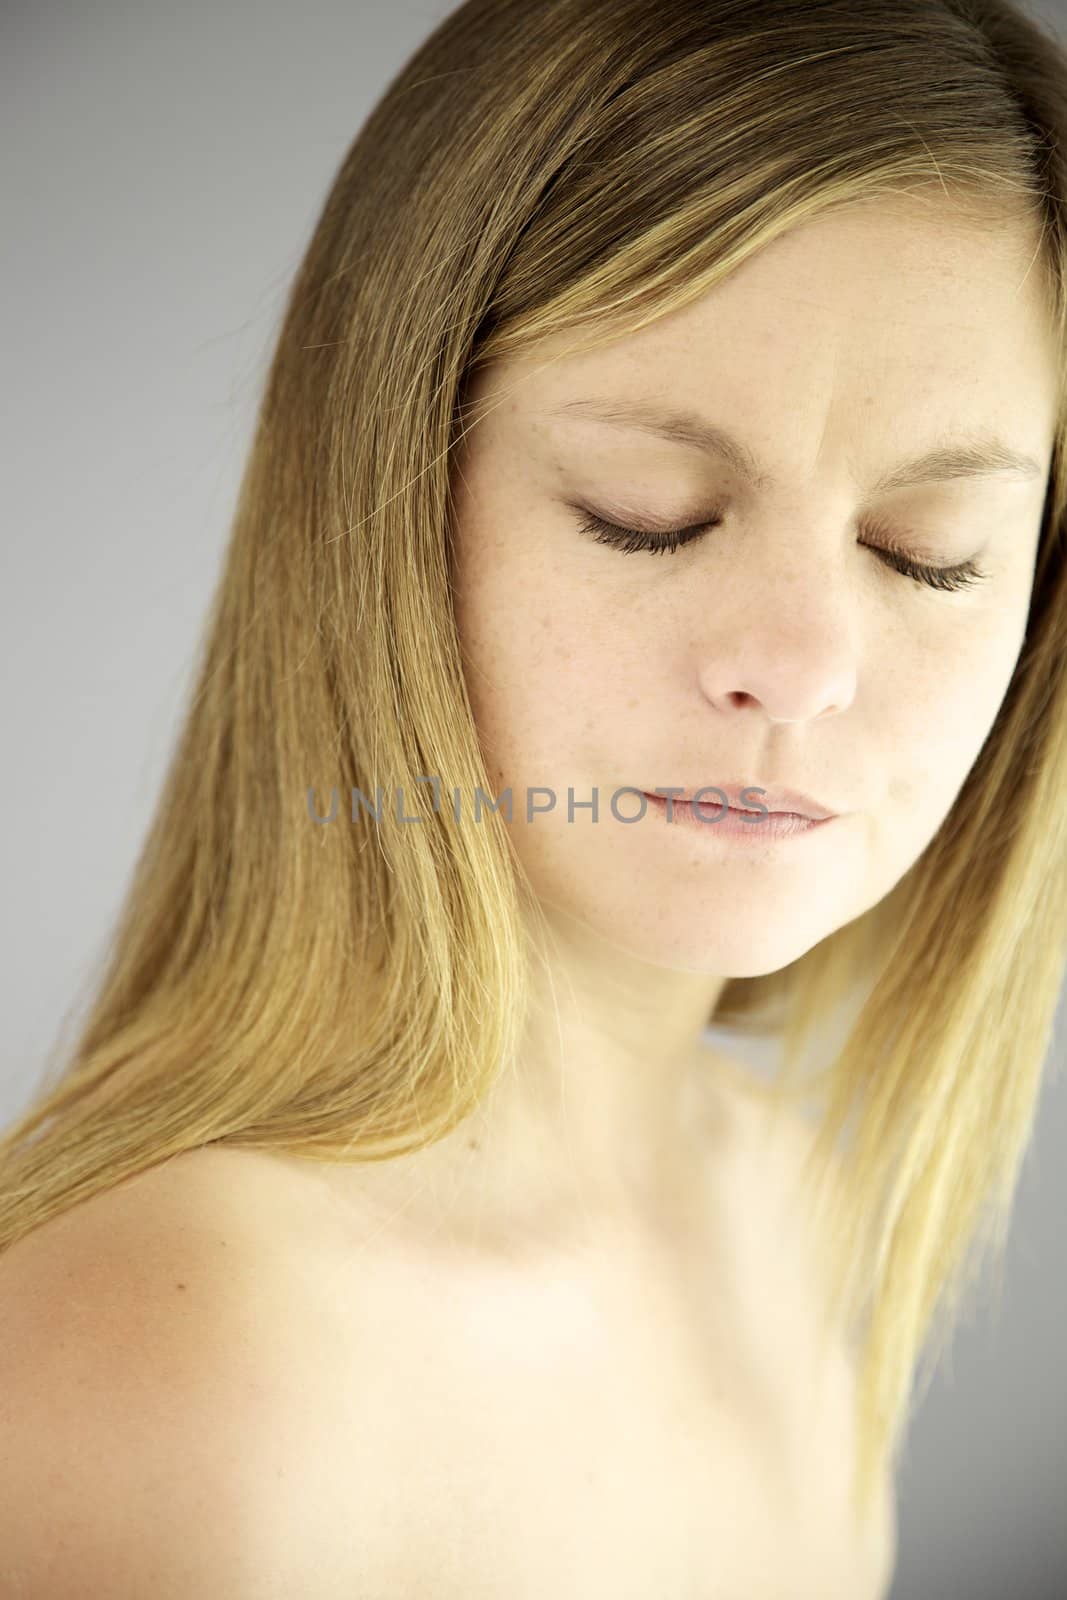 Sad young woman with her eyes closed and suffering expression